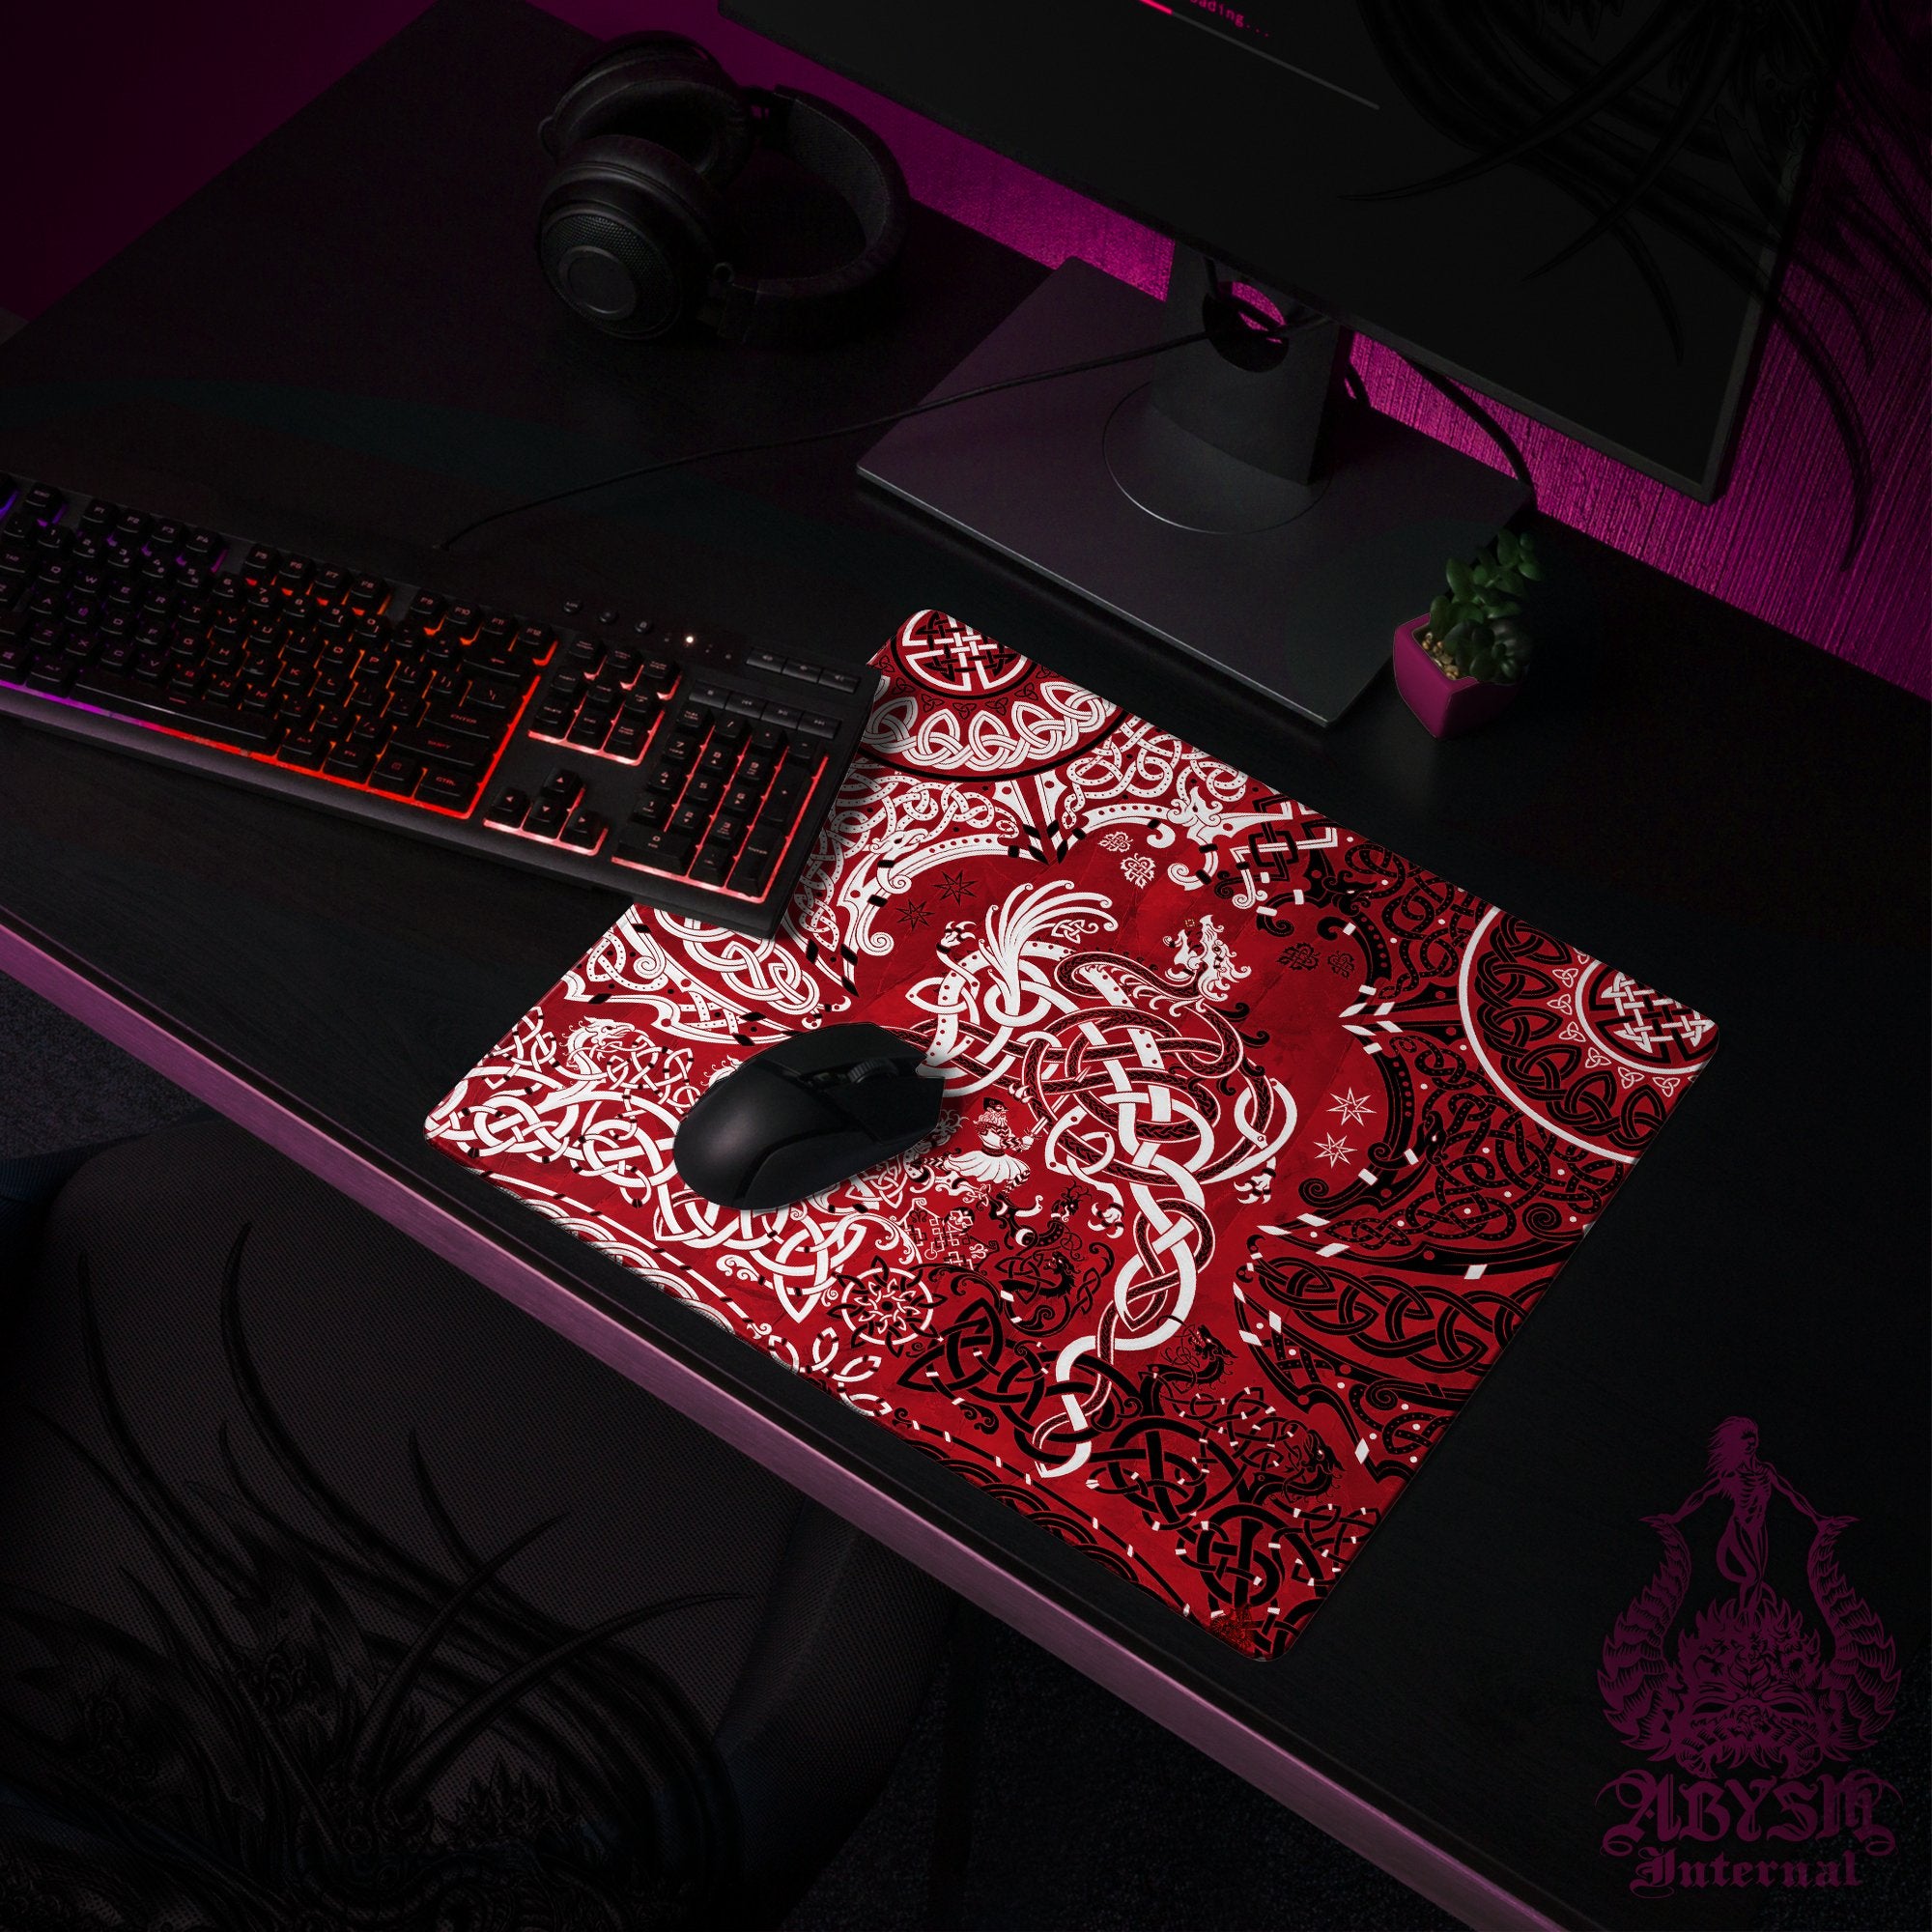 Viking Gaming Desk Mat, Norse Dragon Mouse Pad, Nordic Knotwork Table Protector Cover, Fafnir Workpad, Art Print - Bloody Red - Abysm Internal